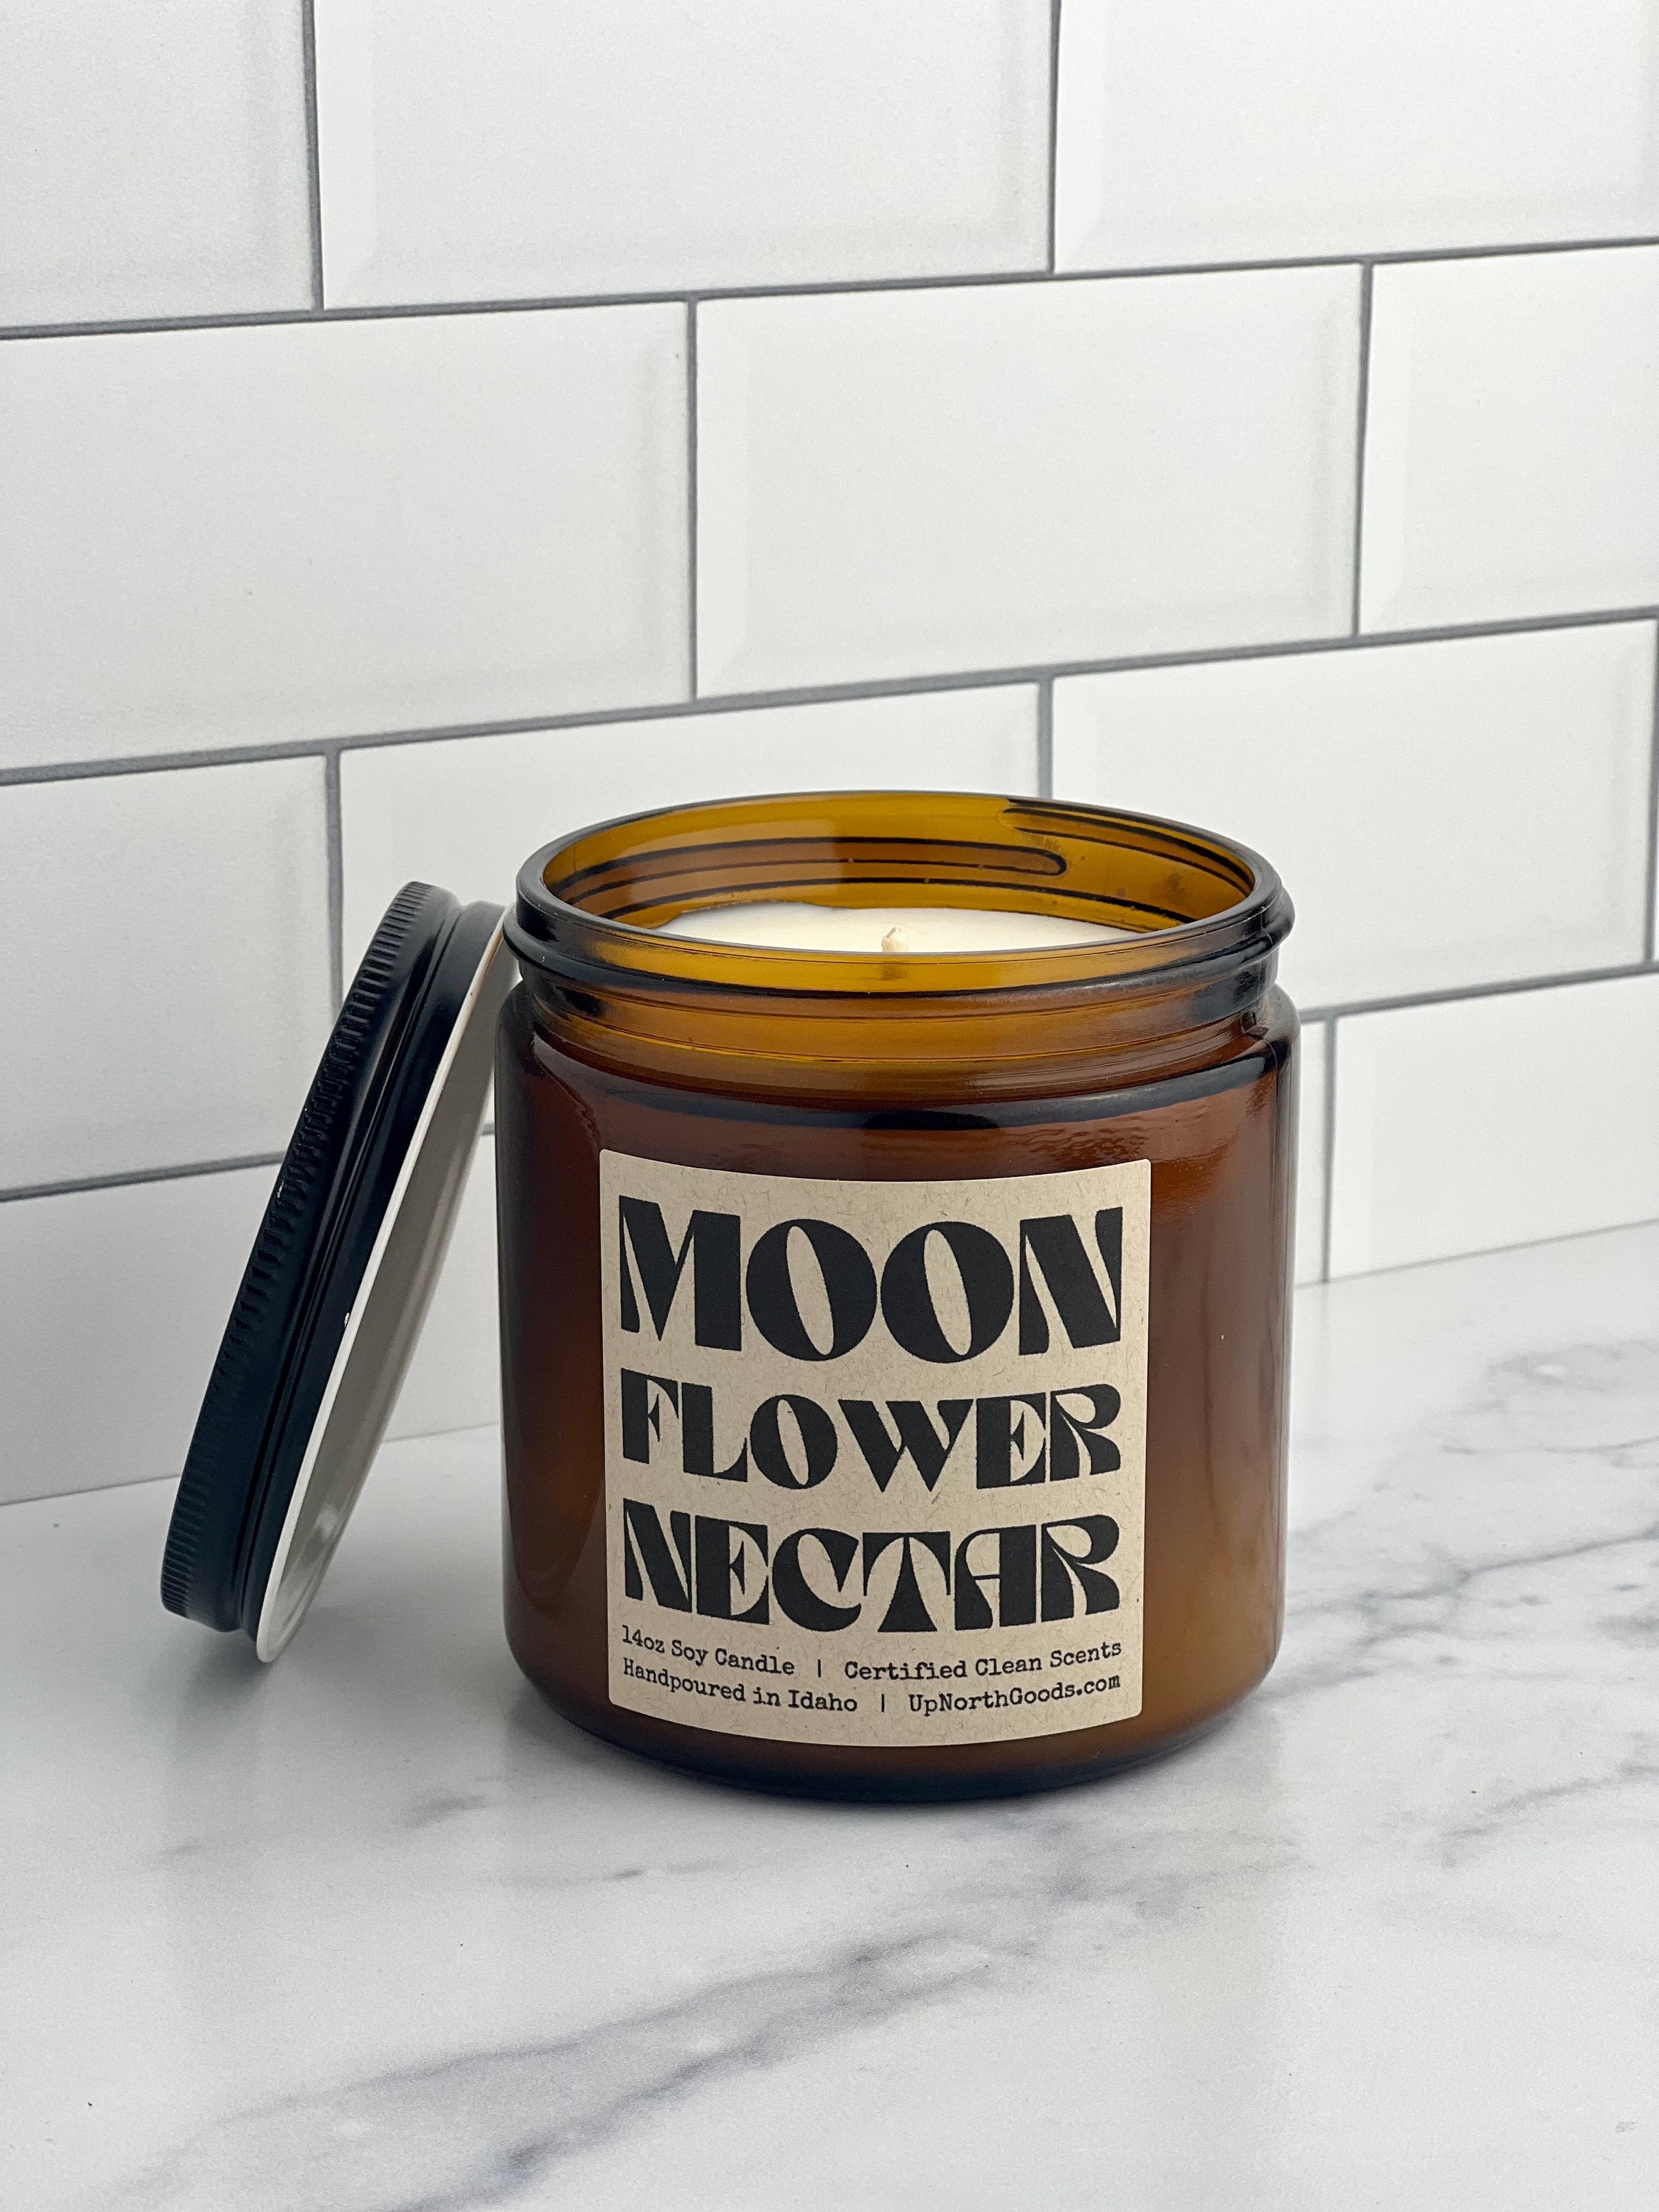 Moon Flower Nectar Soy Candle